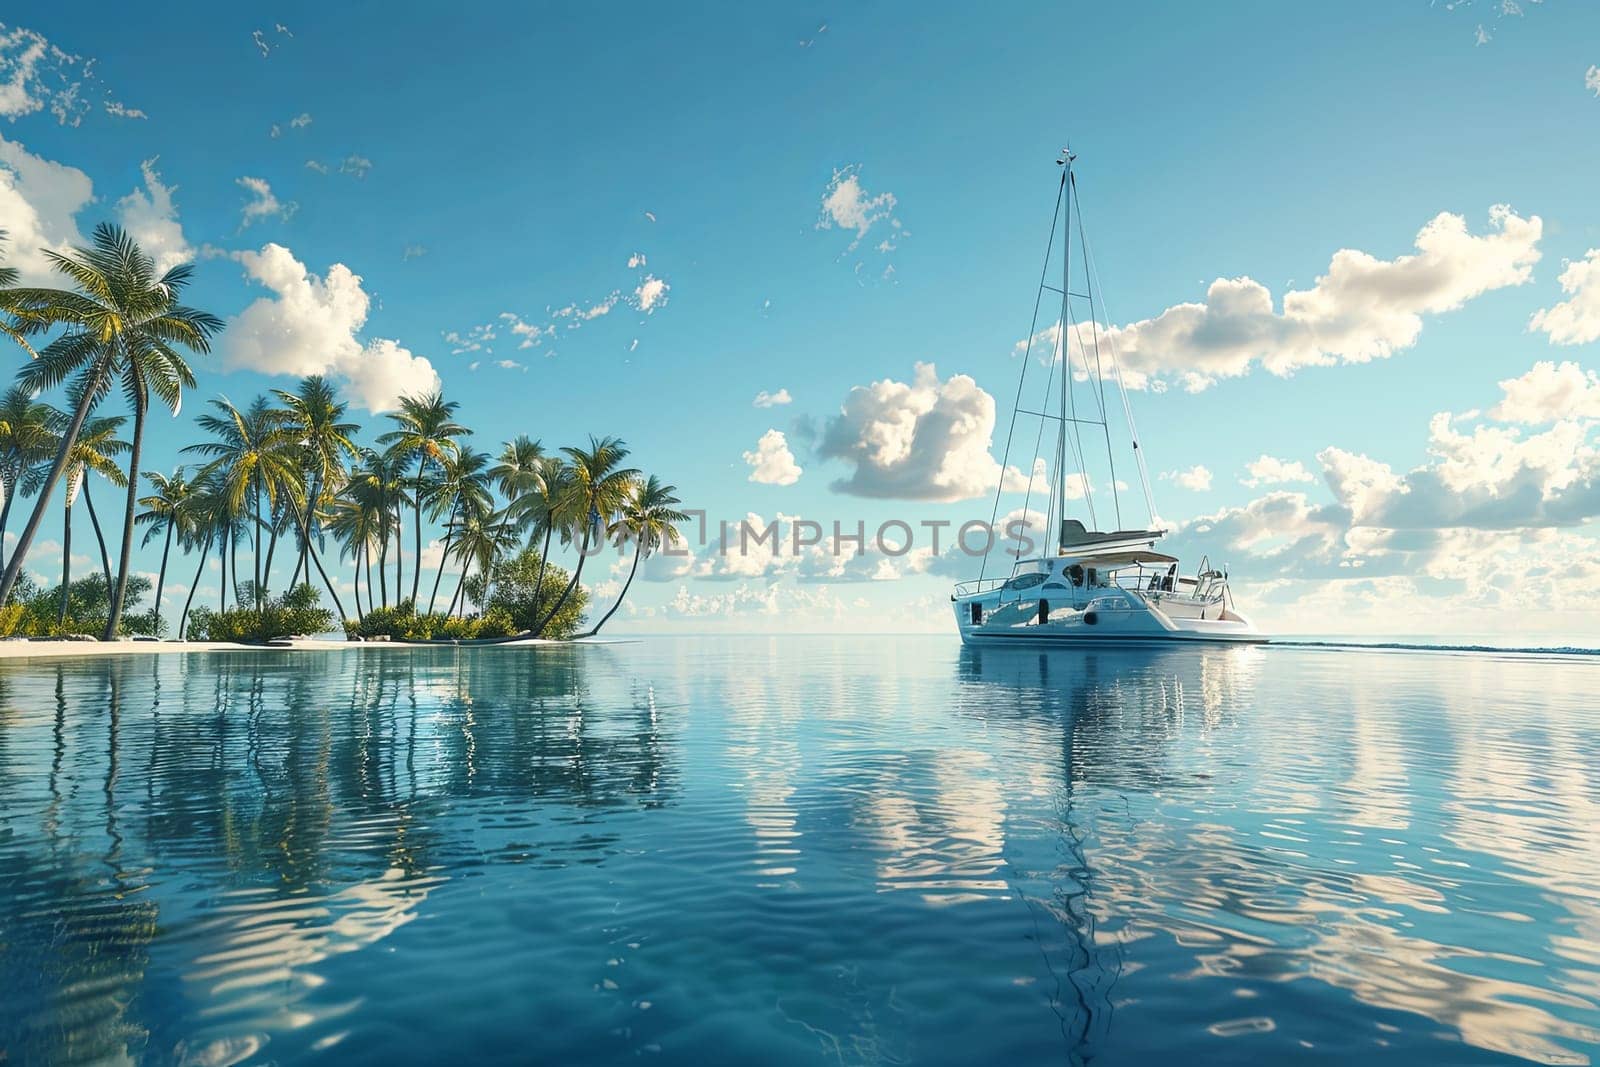 A luxurious yacht peacefully floats on a calm lagoon, surrounded by tall palm trees, creating a picturesque and tranquil scene.